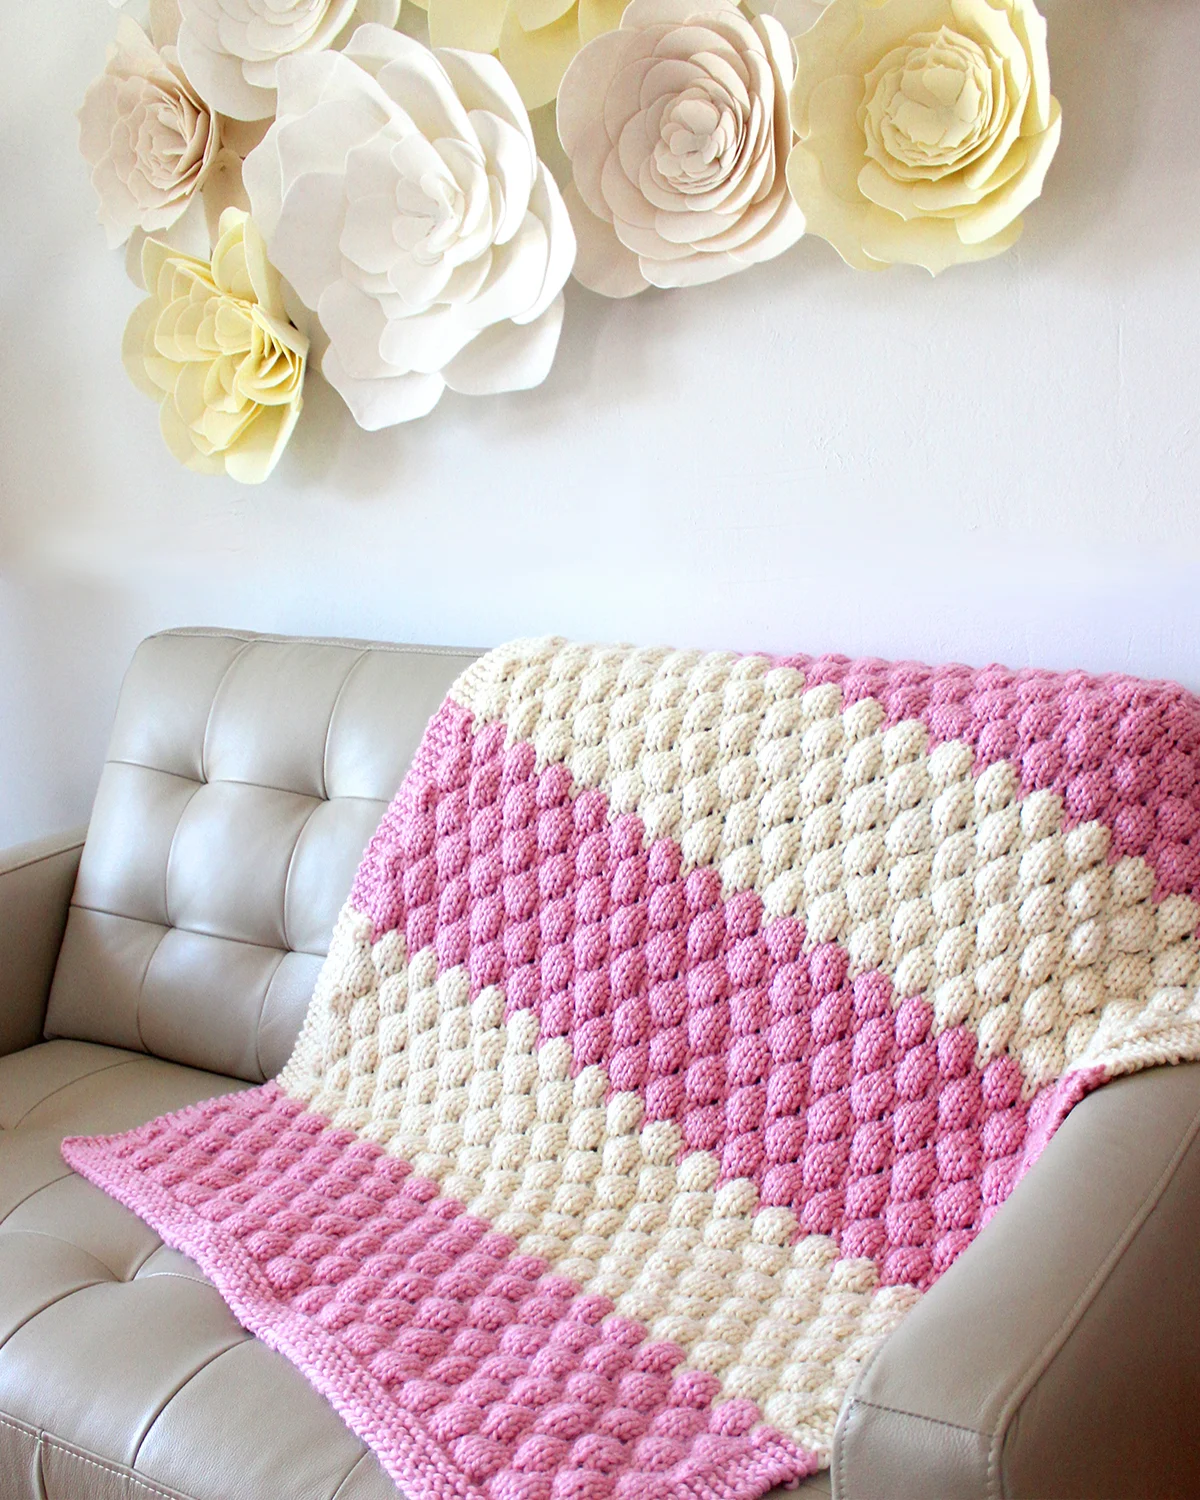 Knitted Bubble Stitch Blanket in pink and white yarn colors on a couch and felt flowers on the wall.